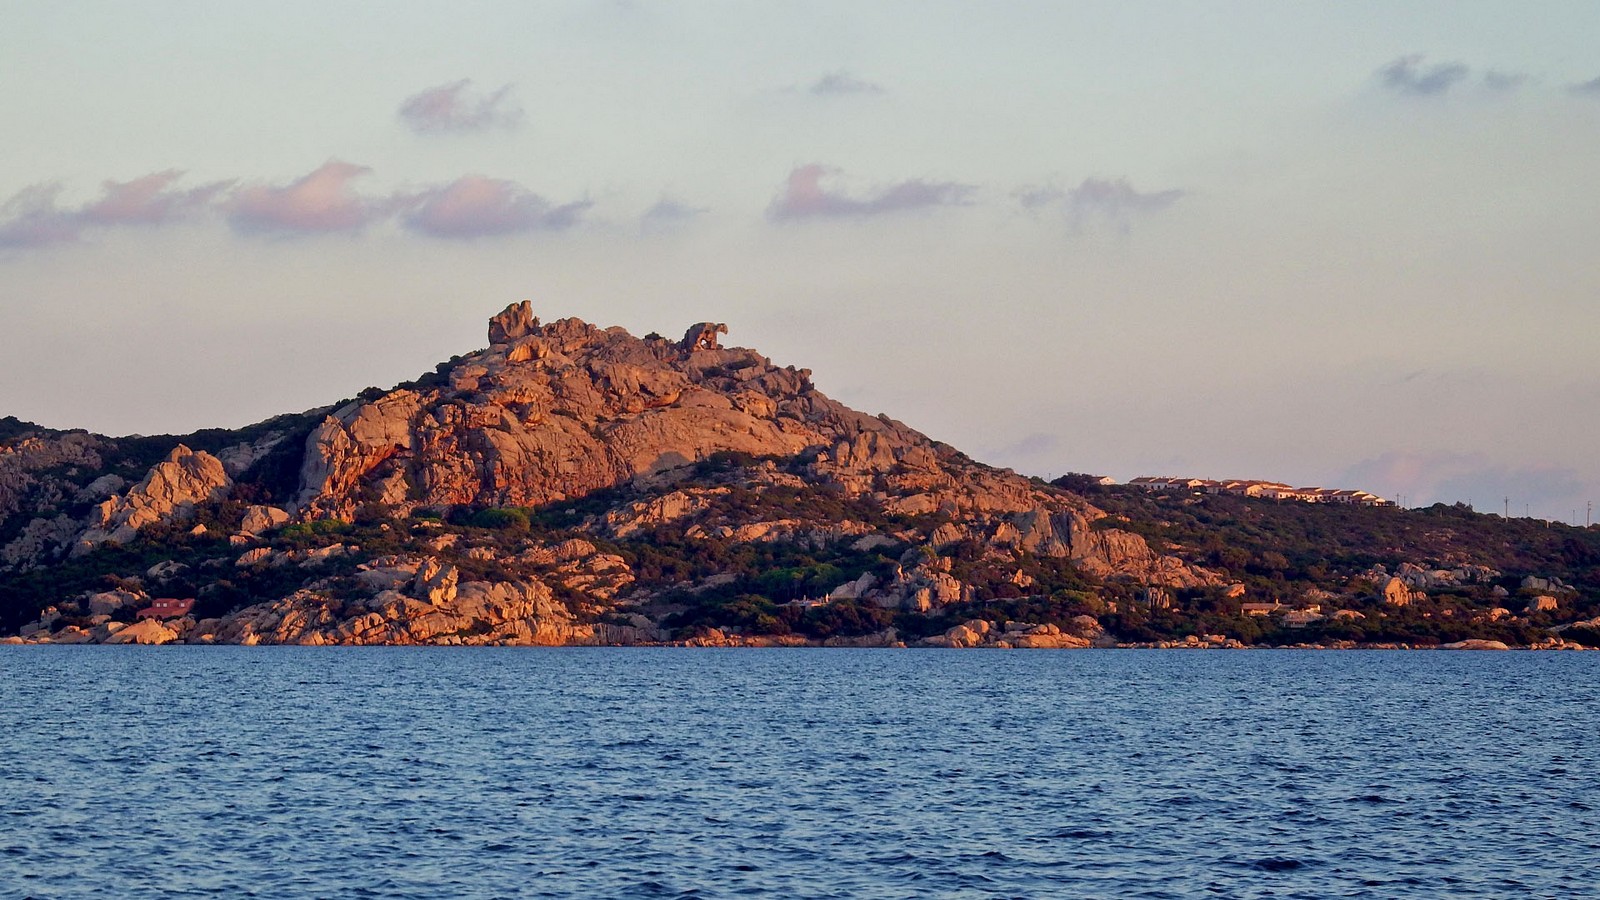 Views of the Orso (the bear!) from Santo Stefano island